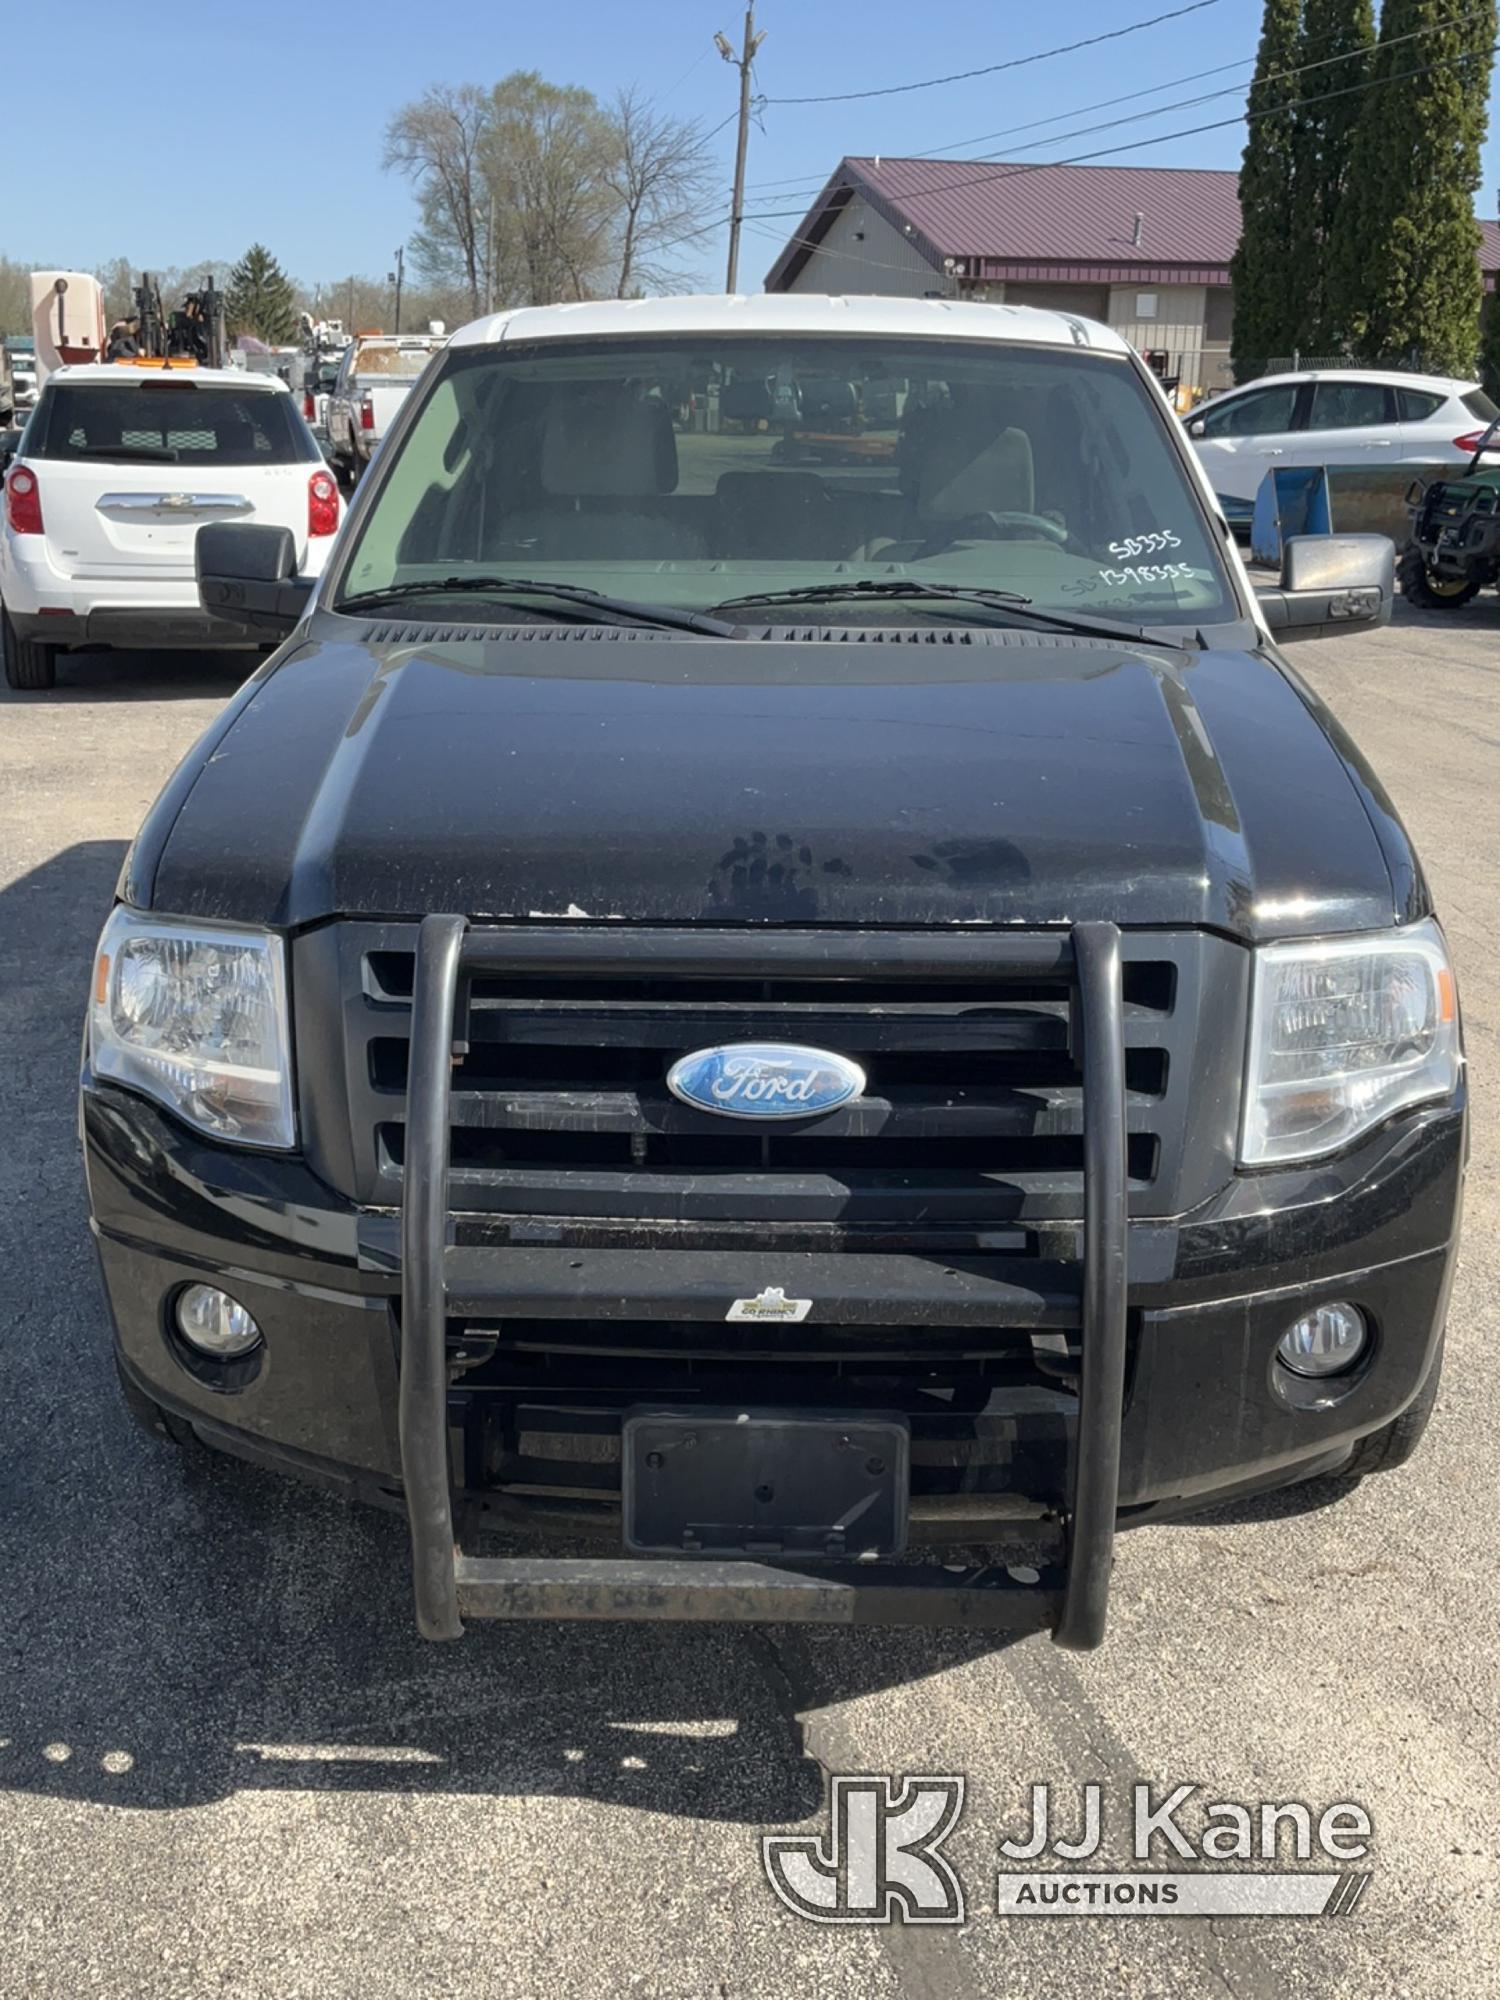 (South Beloit, IL) 2008 Ford Expedition 4x4 4-Door Sport Utility Vehicle Former Police) (Runs & Move